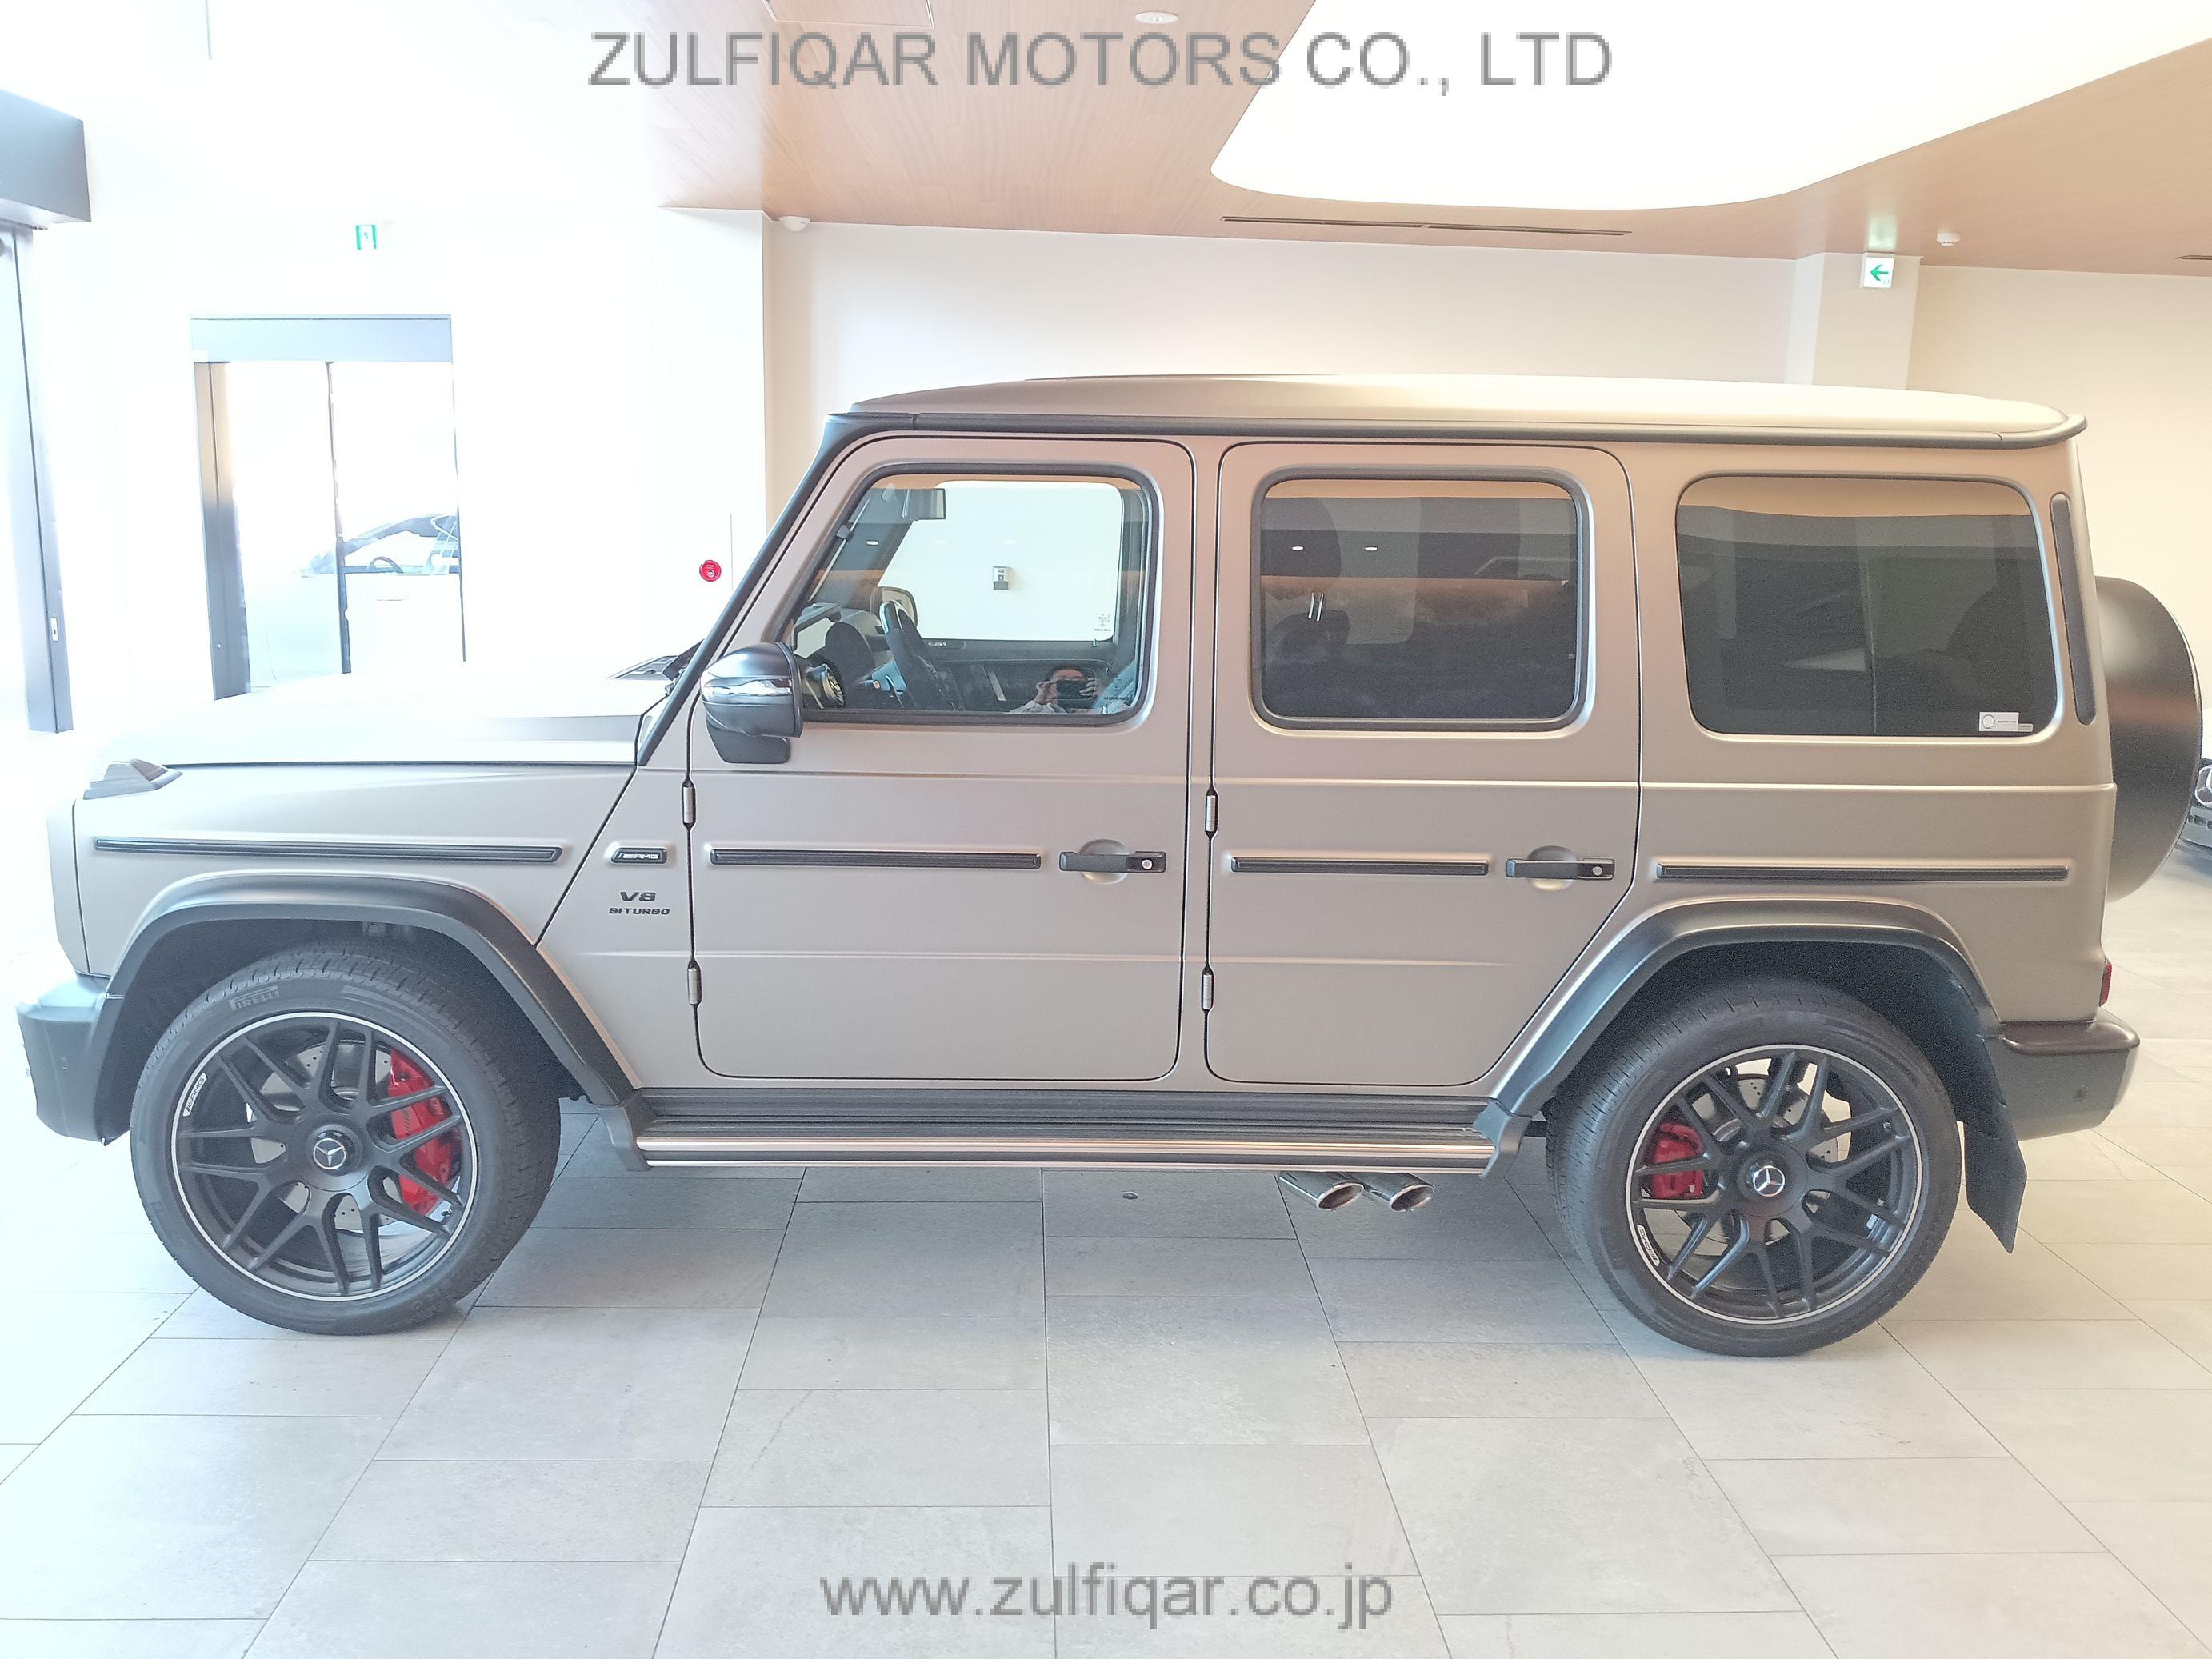 MERCEDES AMG G CLASS 2021 Image 22